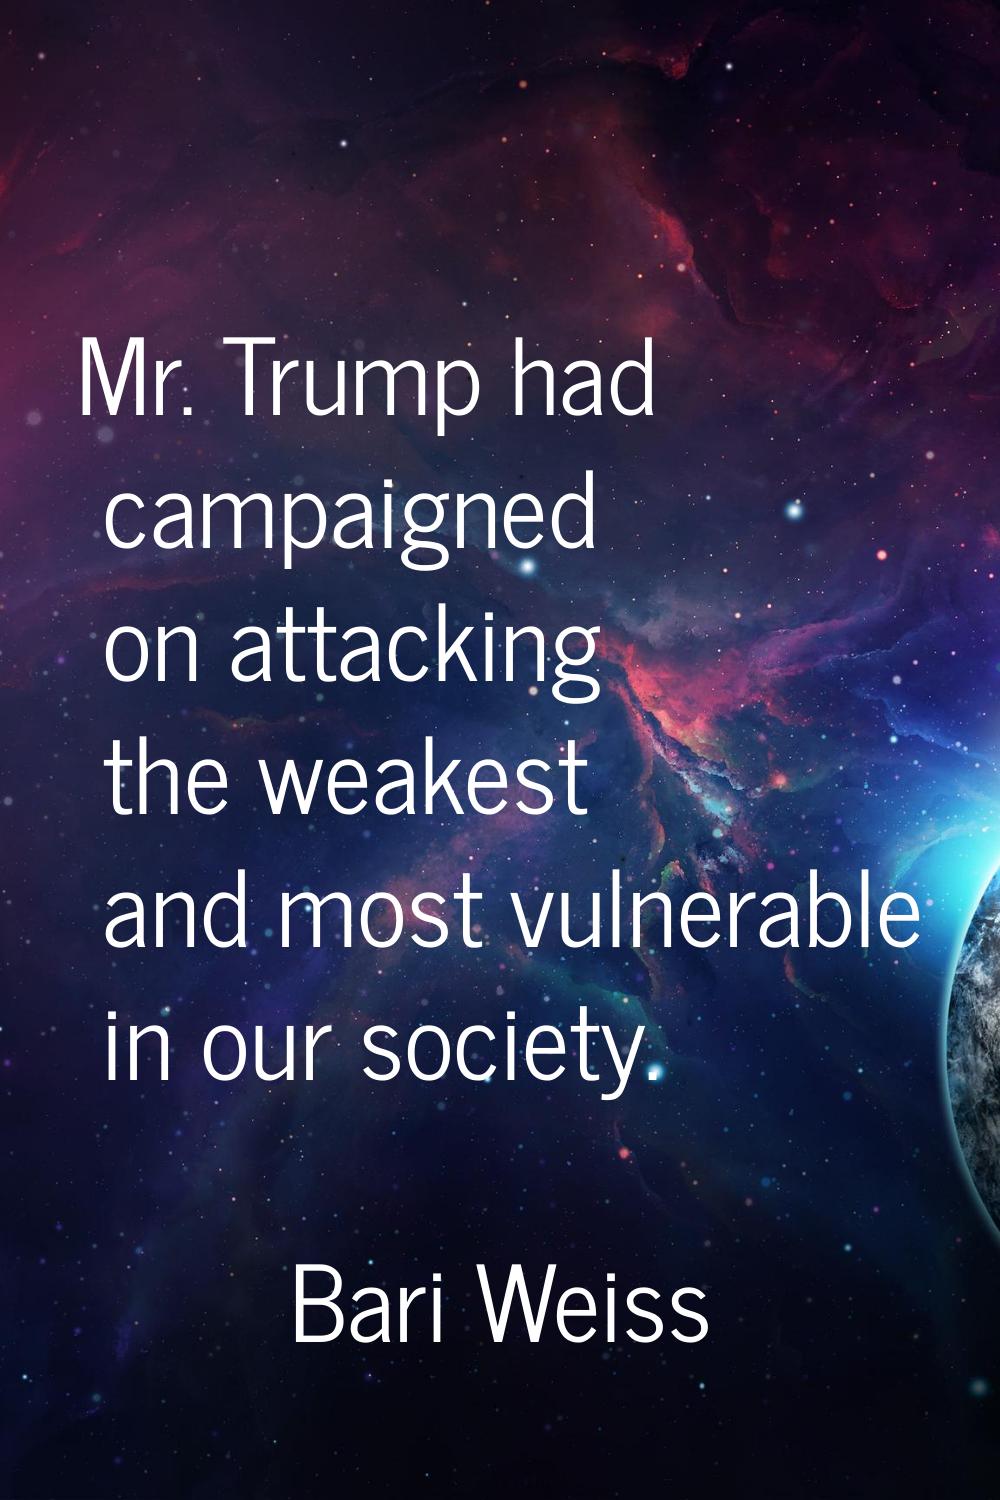 Mr. Trump had campaigned on attacking the weakest and most vulnerable in our society.